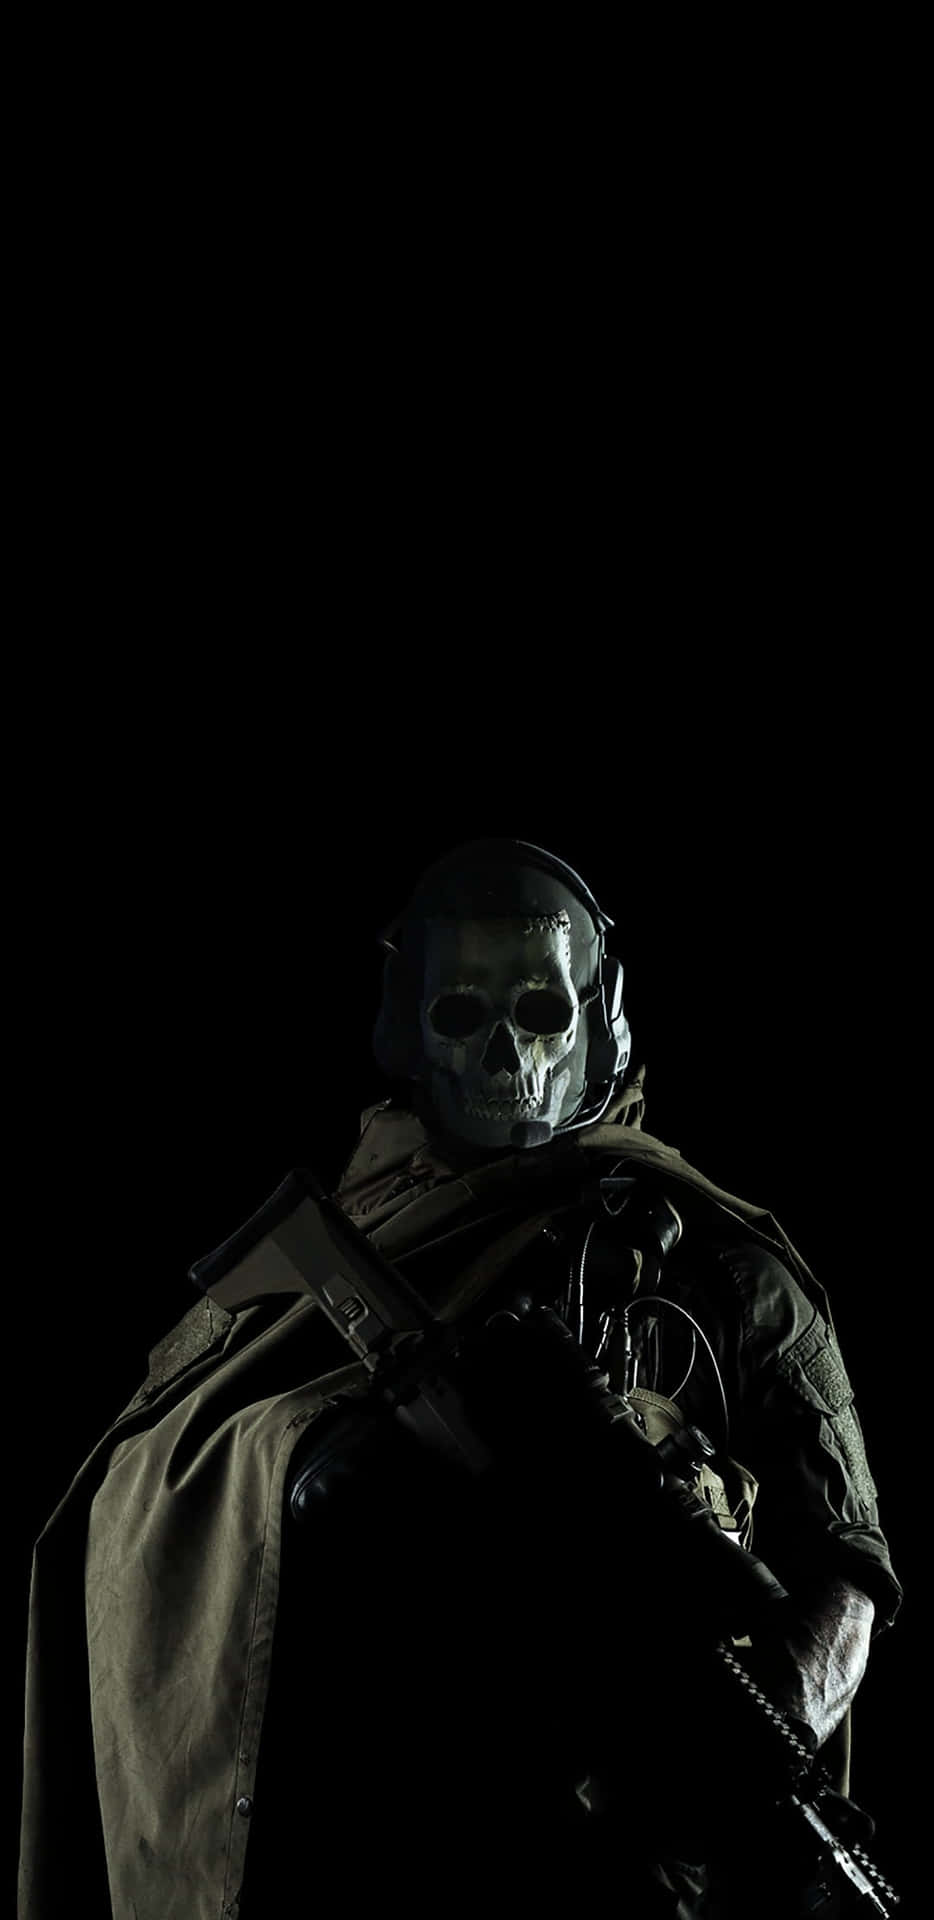 Call of Duty: Ghosts Action Scene Wallpaper